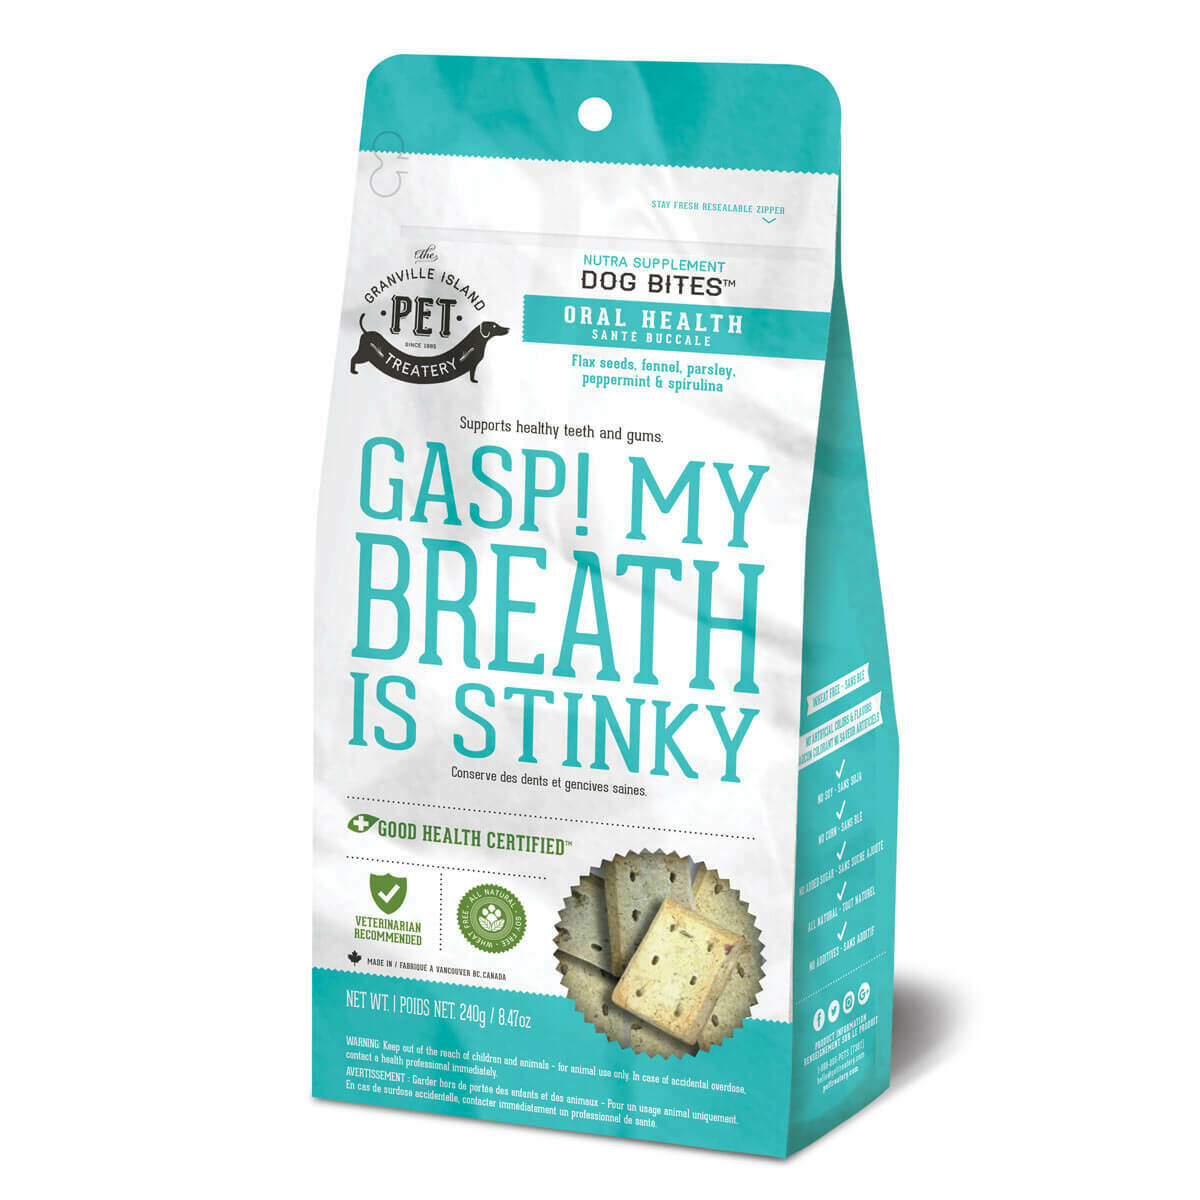 The Granville Island Pet Treatery Gasp! My Breath is Stinky 240g